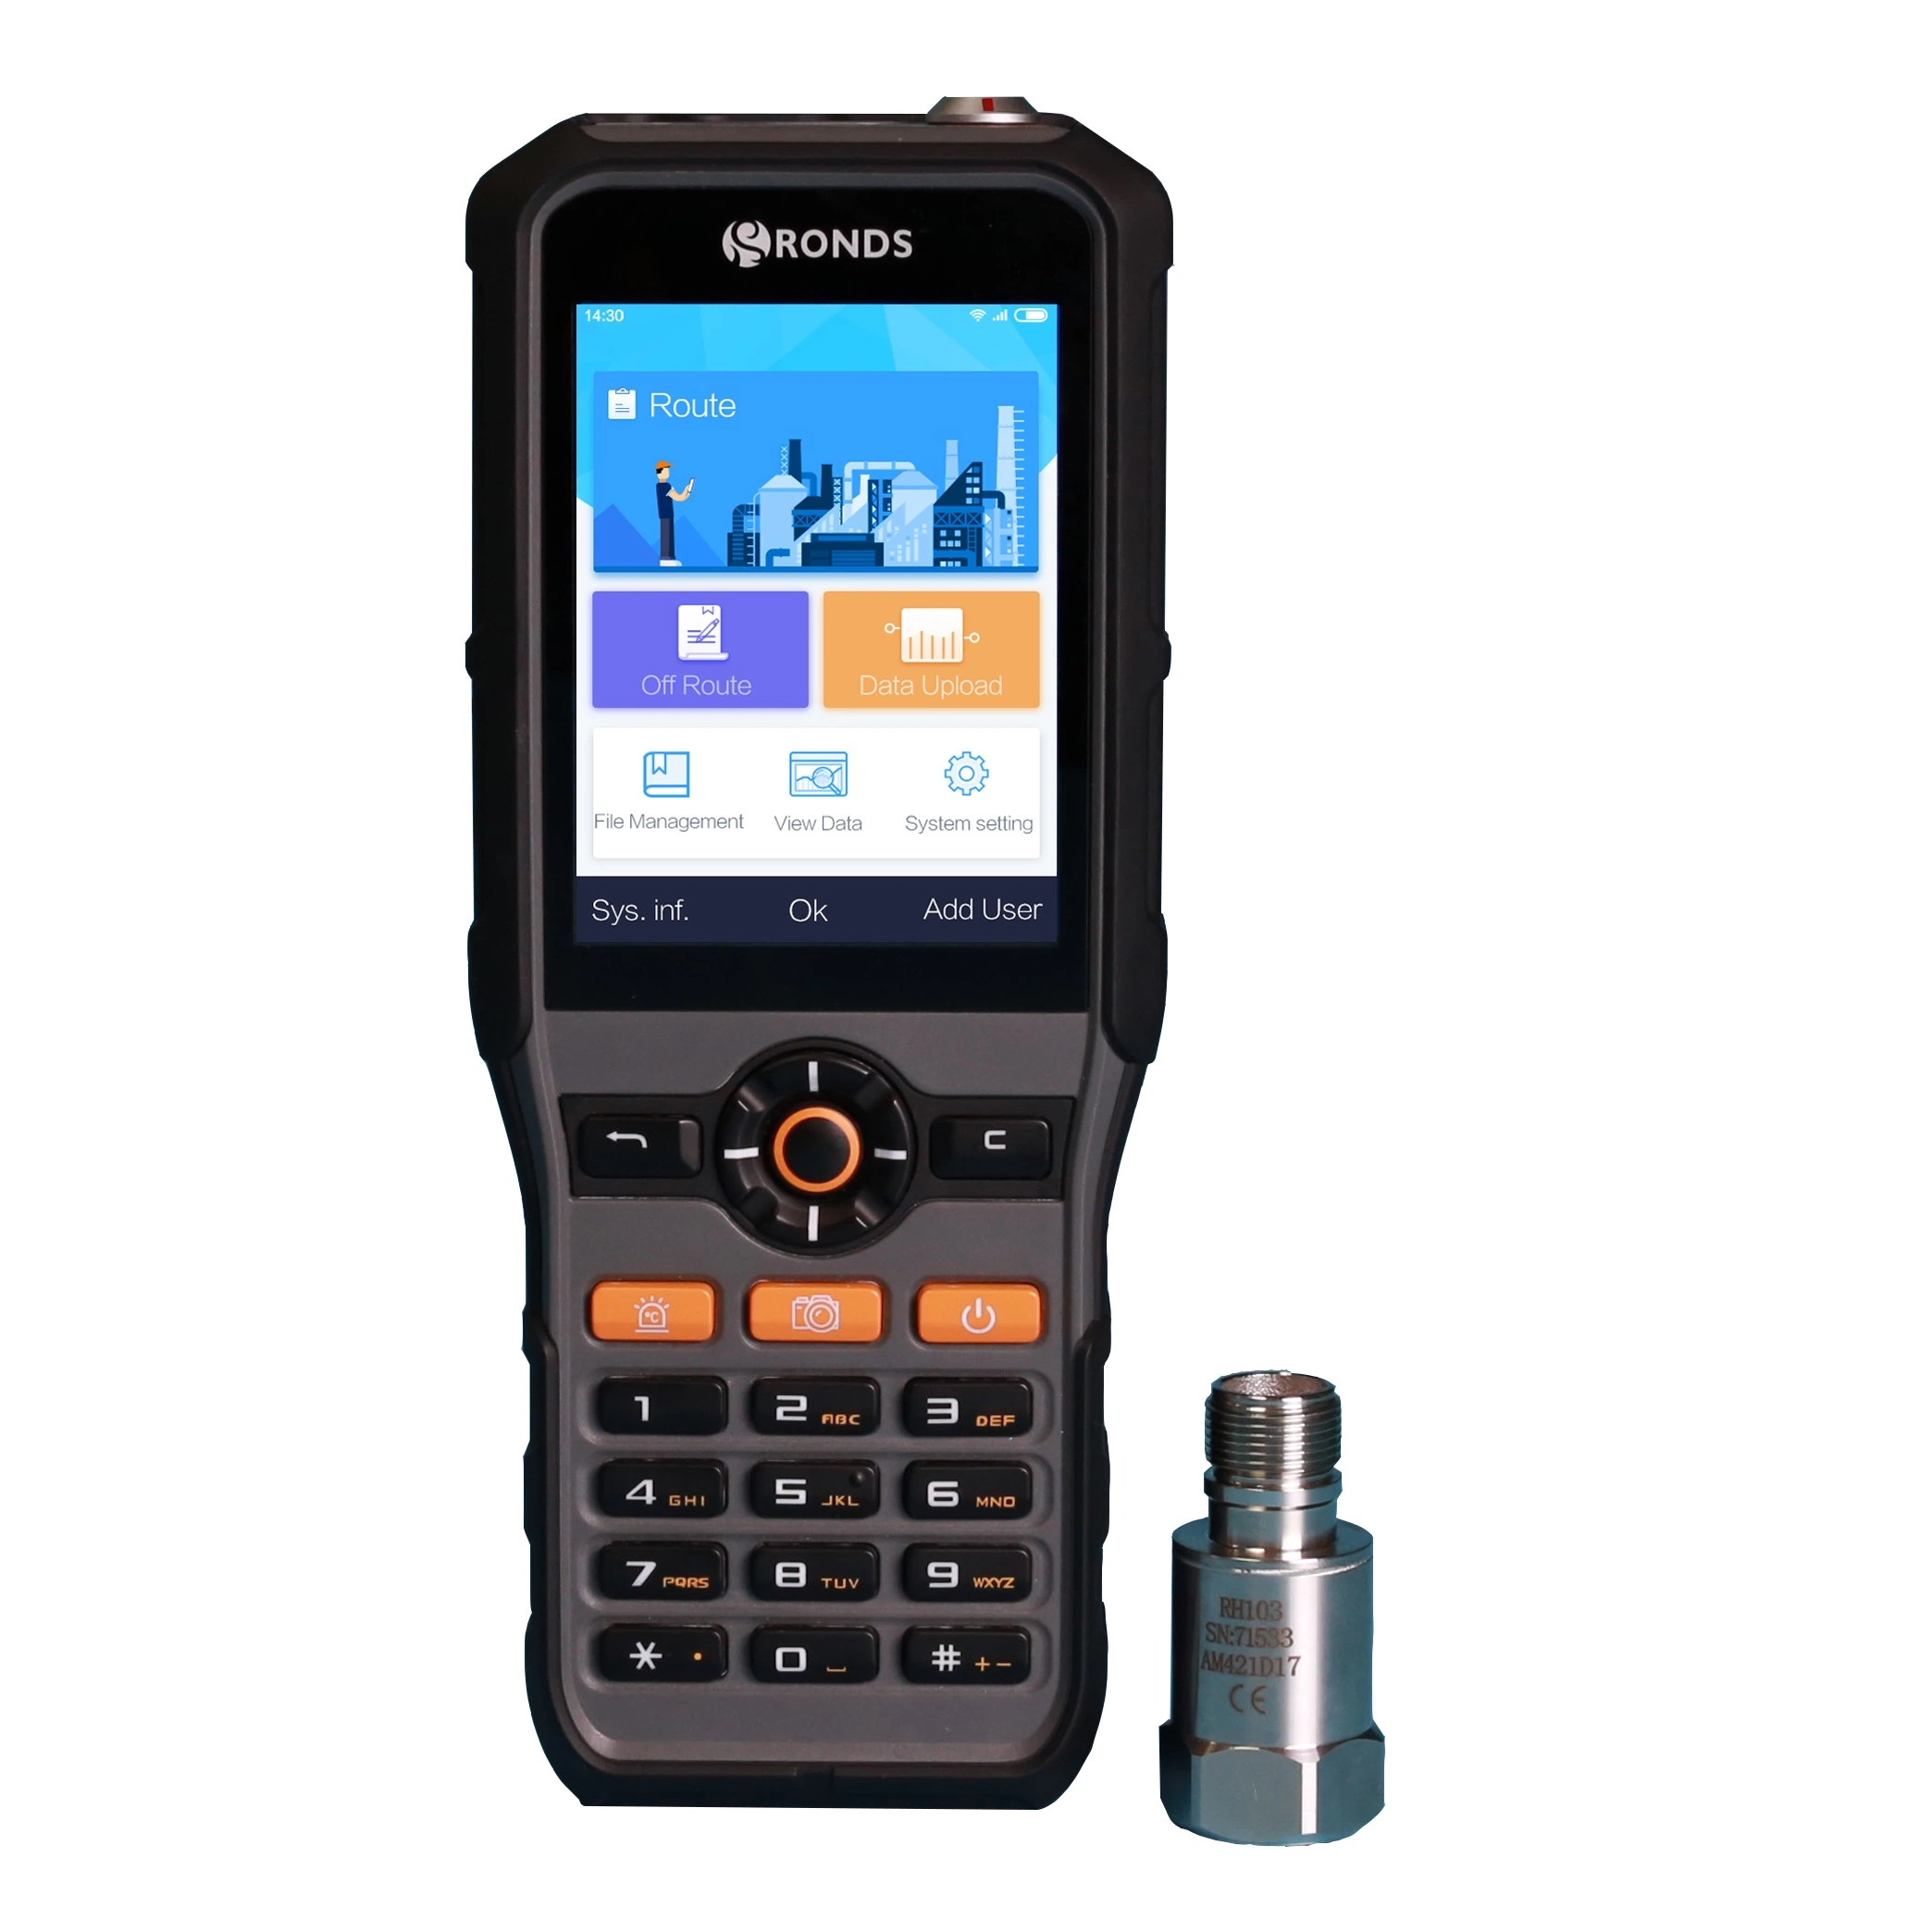 Vibration Meters, with Integrated Function of Temperature Measuring